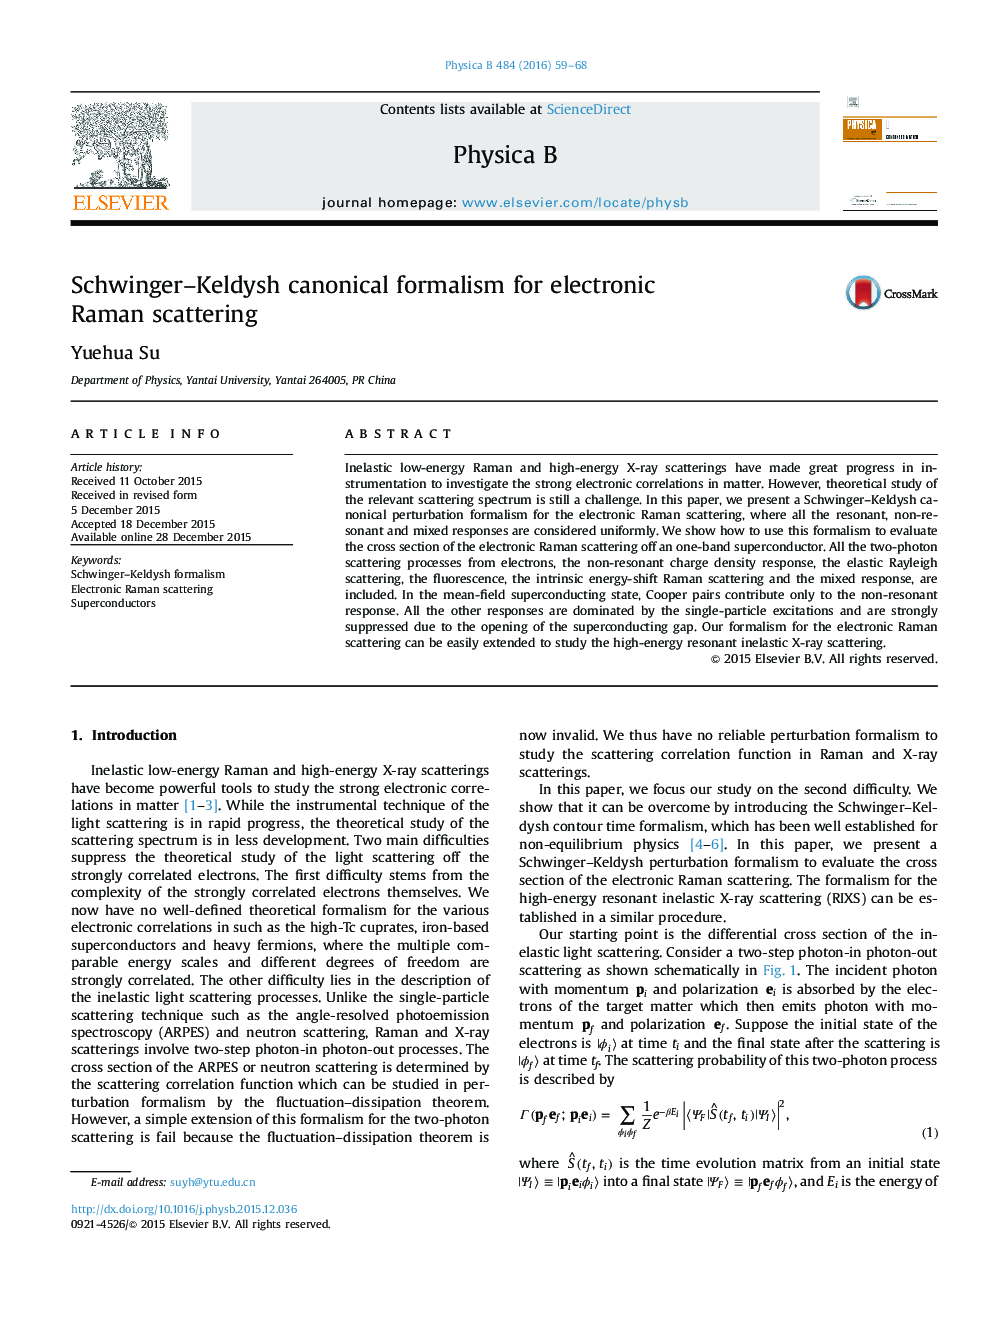 Schwinger–Keldysh canonical formalism for electronic Raman scattering